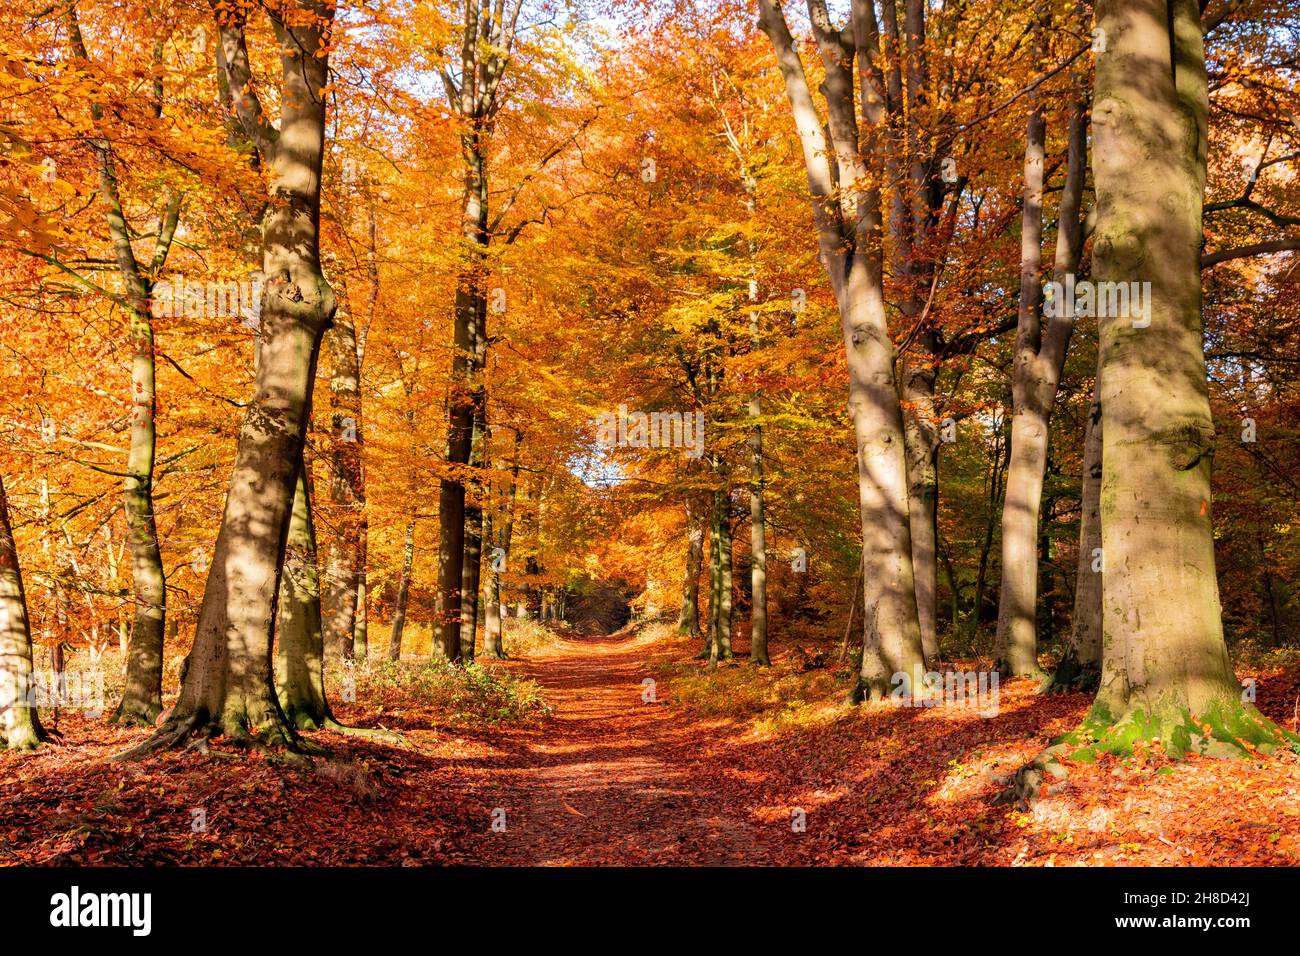 Forest with fallen leaves on a path during Autumn. Stock Photo